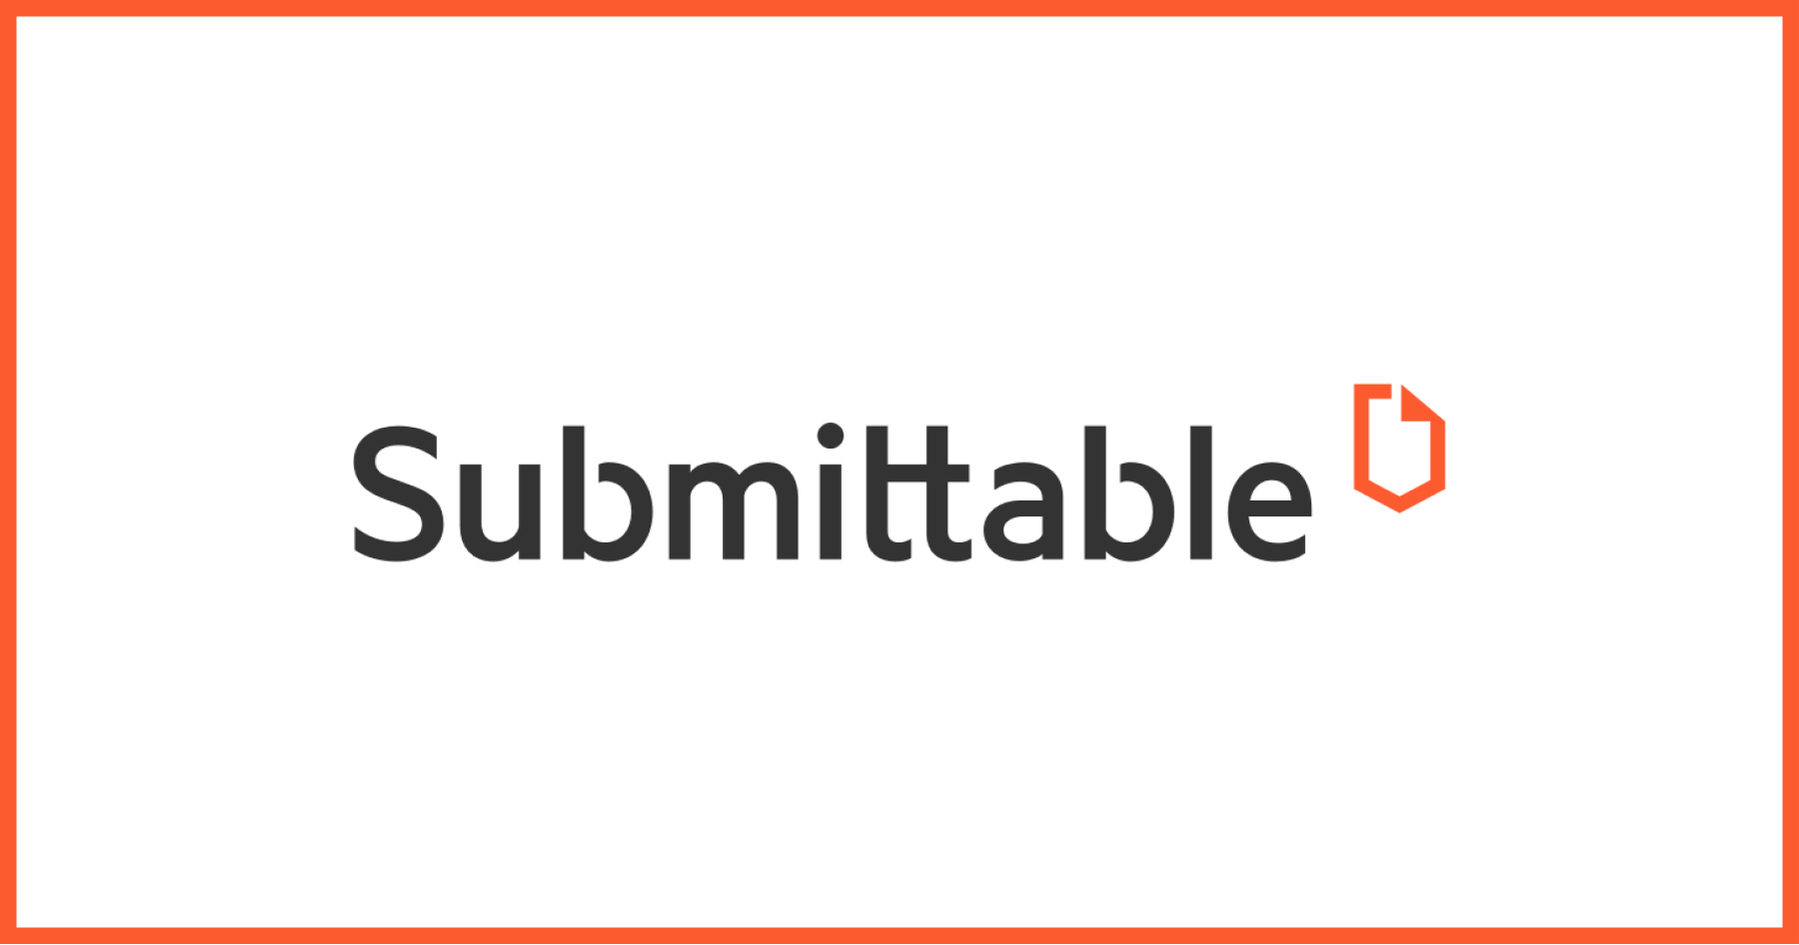 Submittable - Pricing, Features, Alternatives, and More